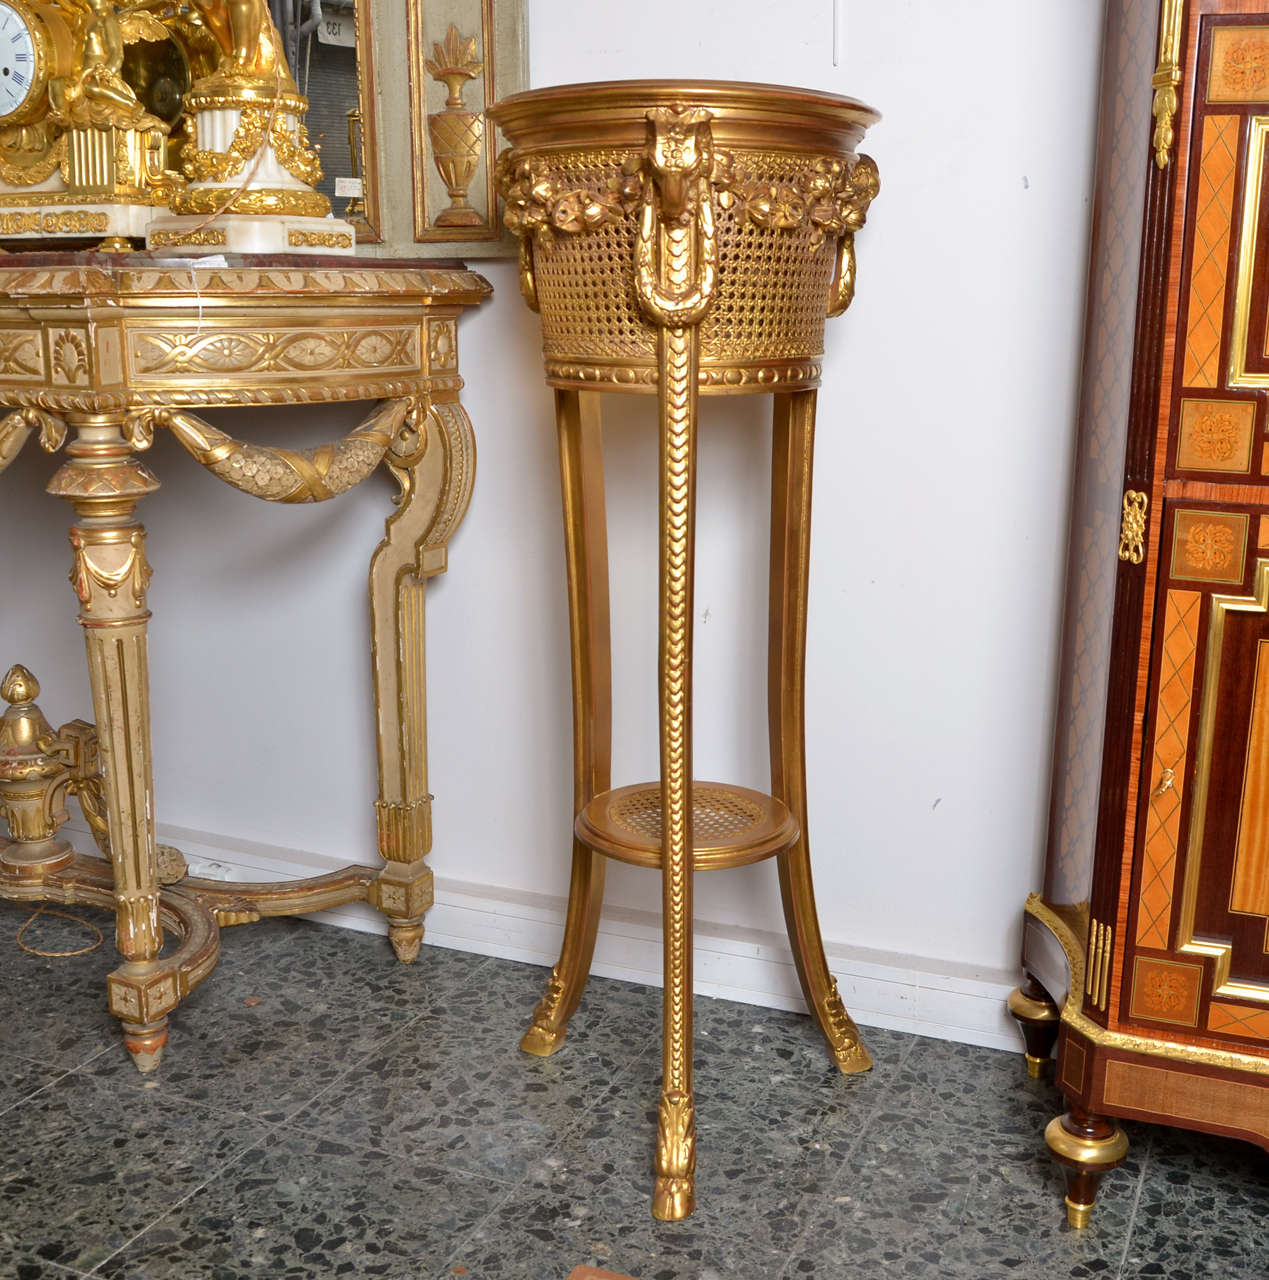 Gilded wood jardinière, the top is canned, bowl in tole painted is newly refected.